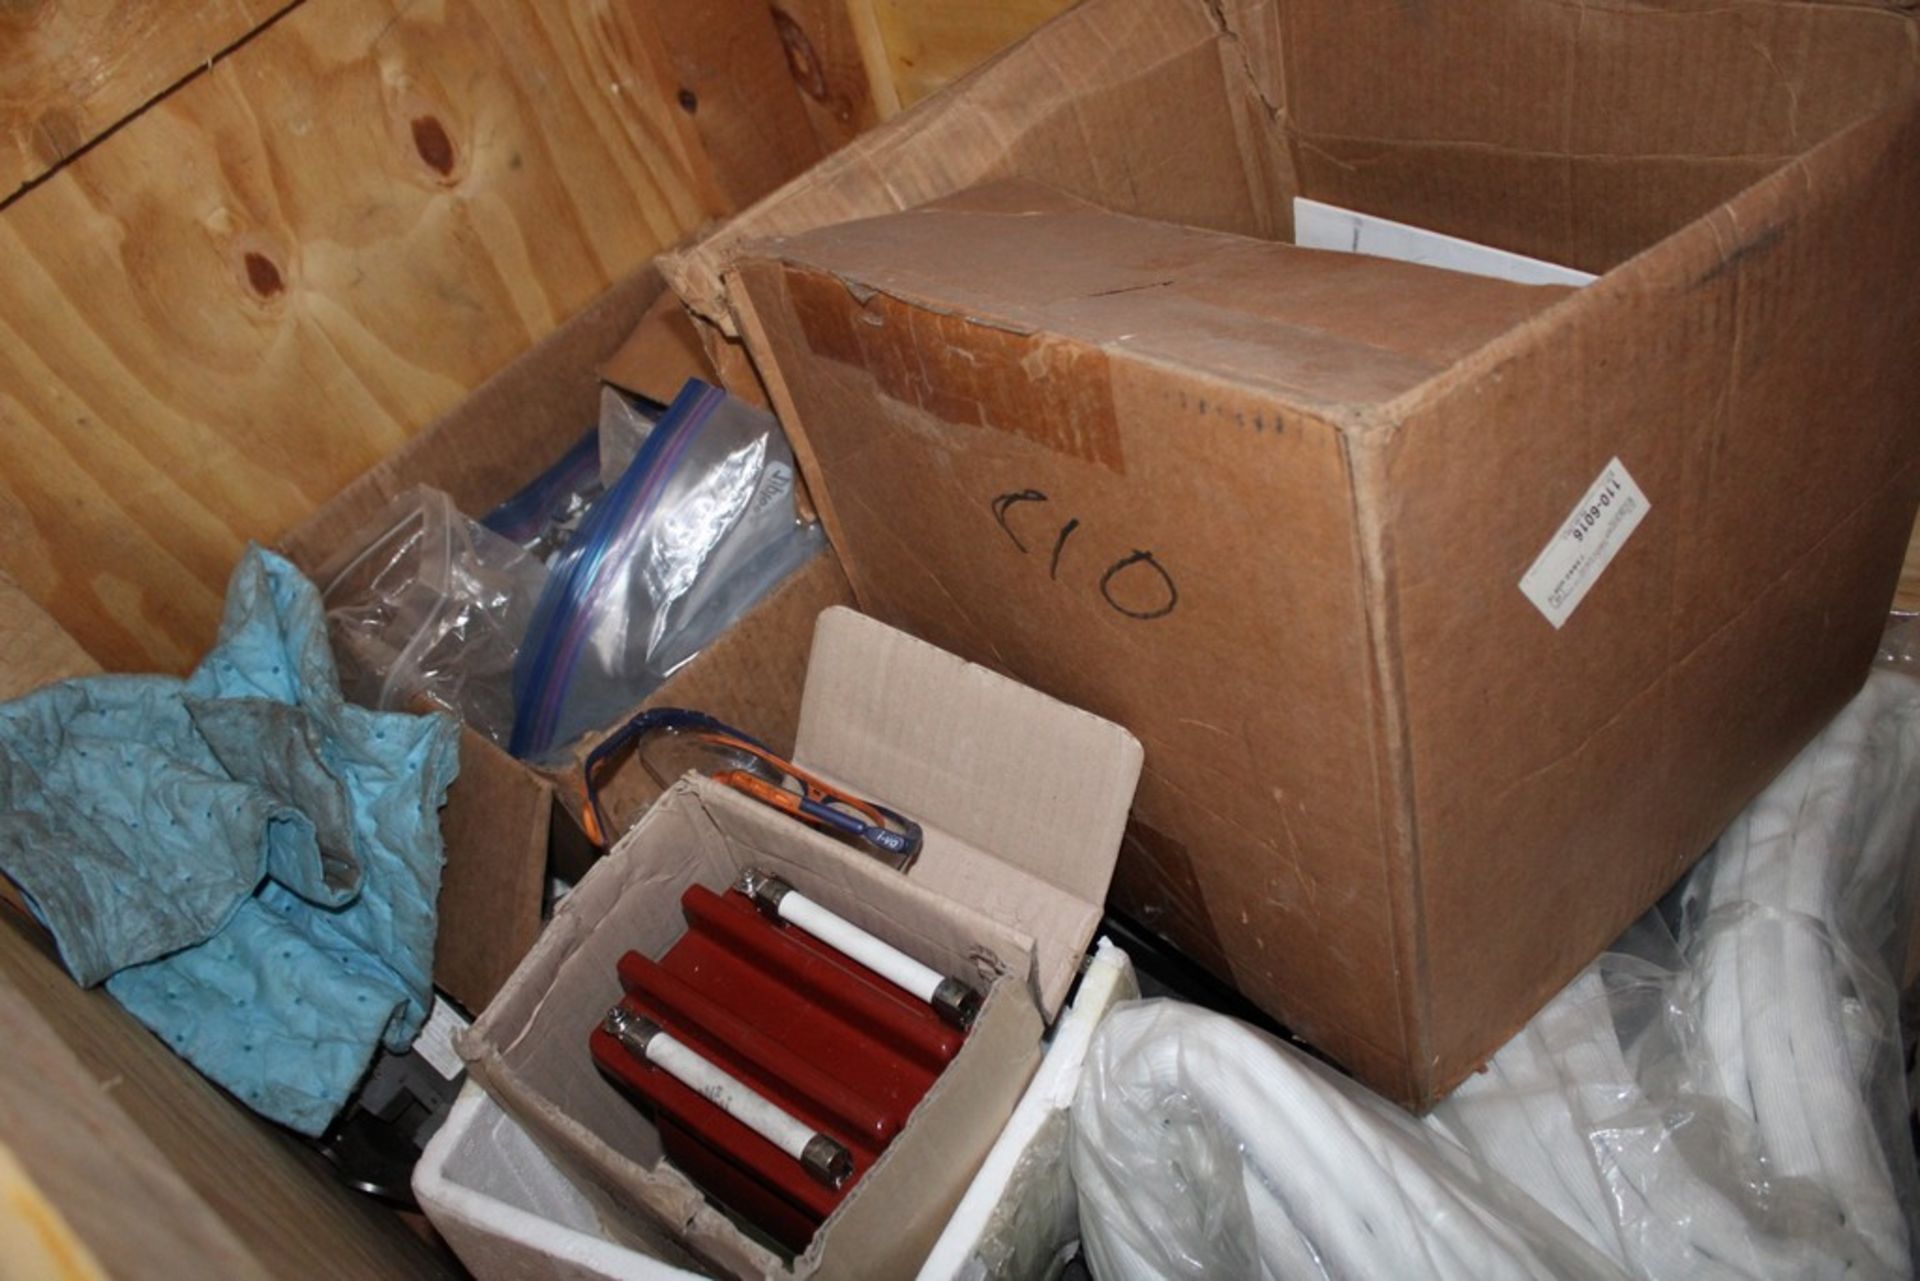 COUPLINGS, FUSES, HARDWARE, GREASER, ETC. IN CRATE - Image 3 of 4